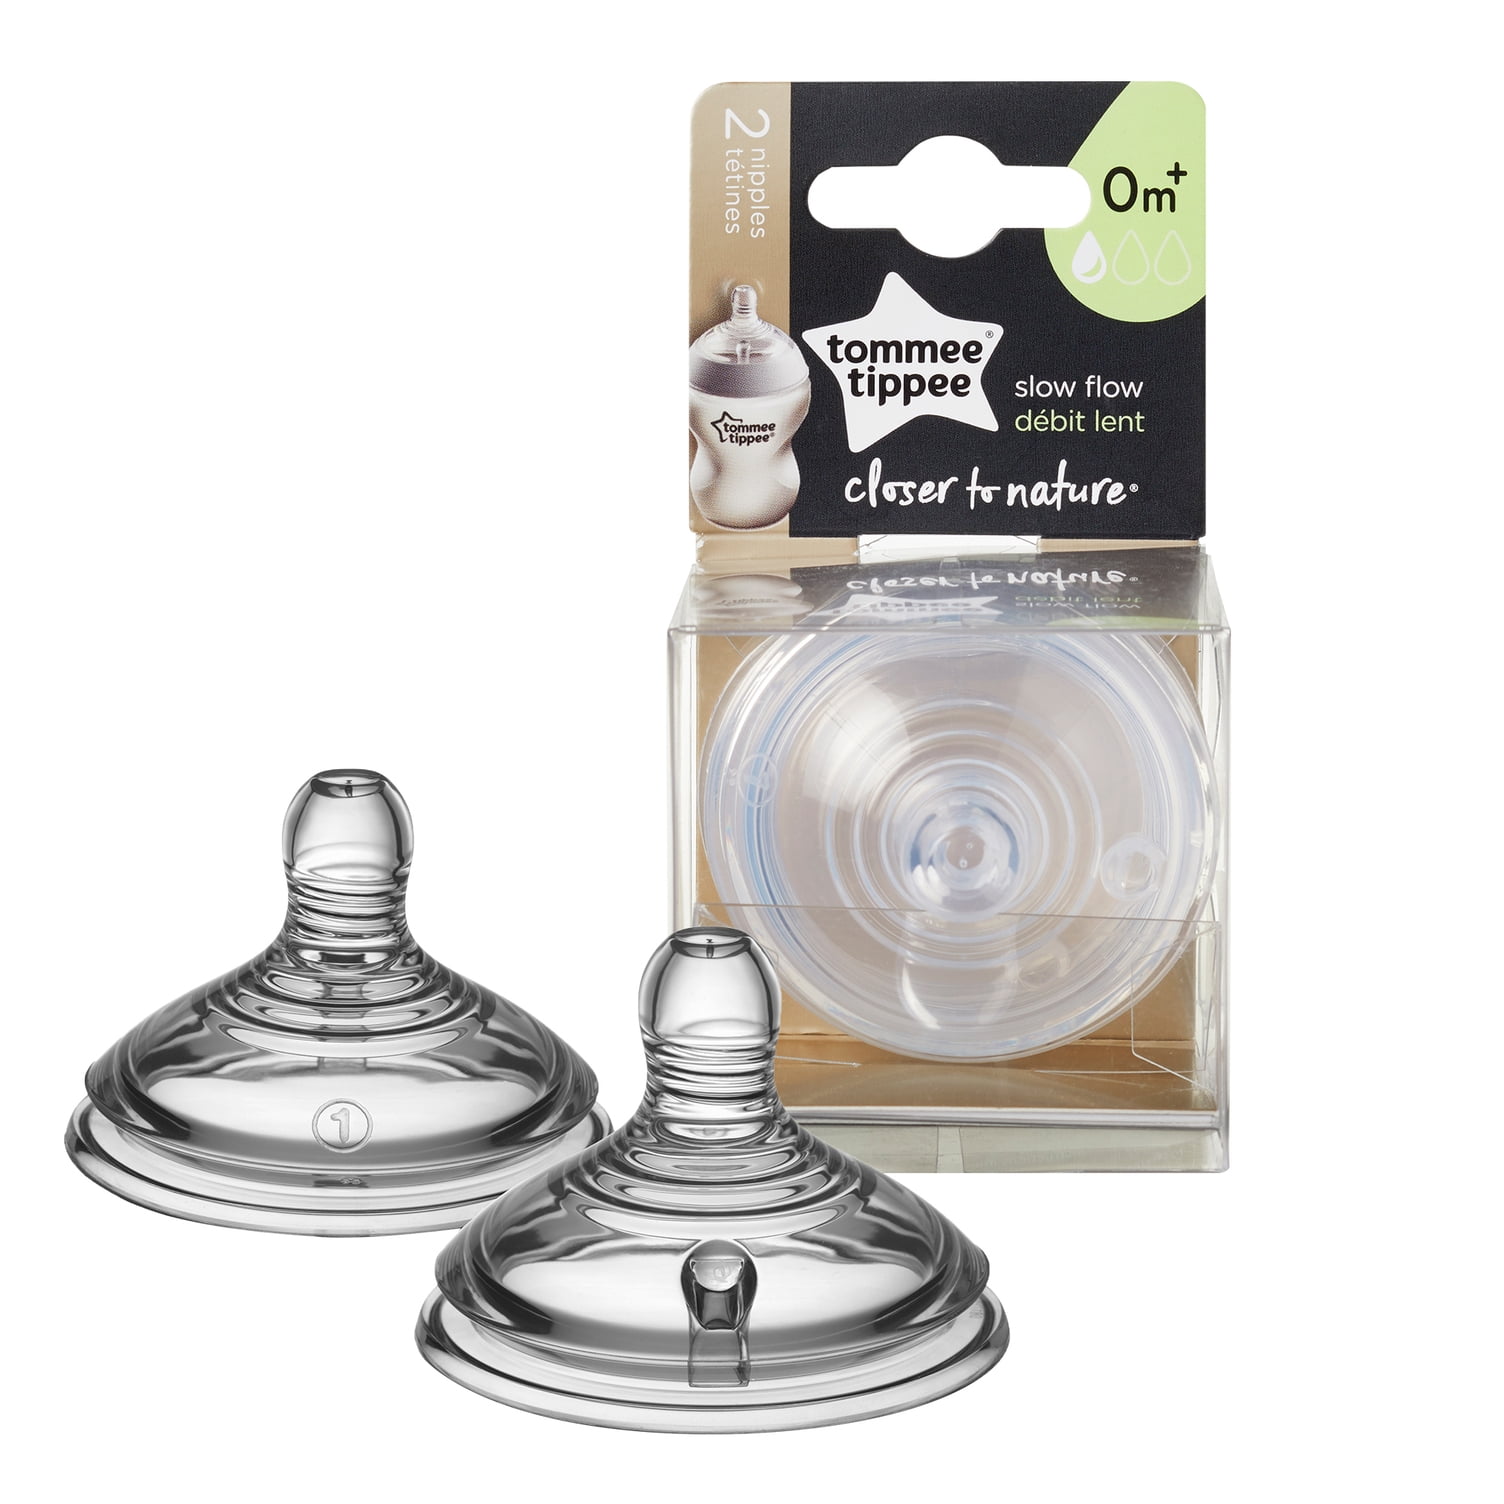 2 x Tommee Tippee Closer to Nature Medium Flow Teats FREE DELIVERY 